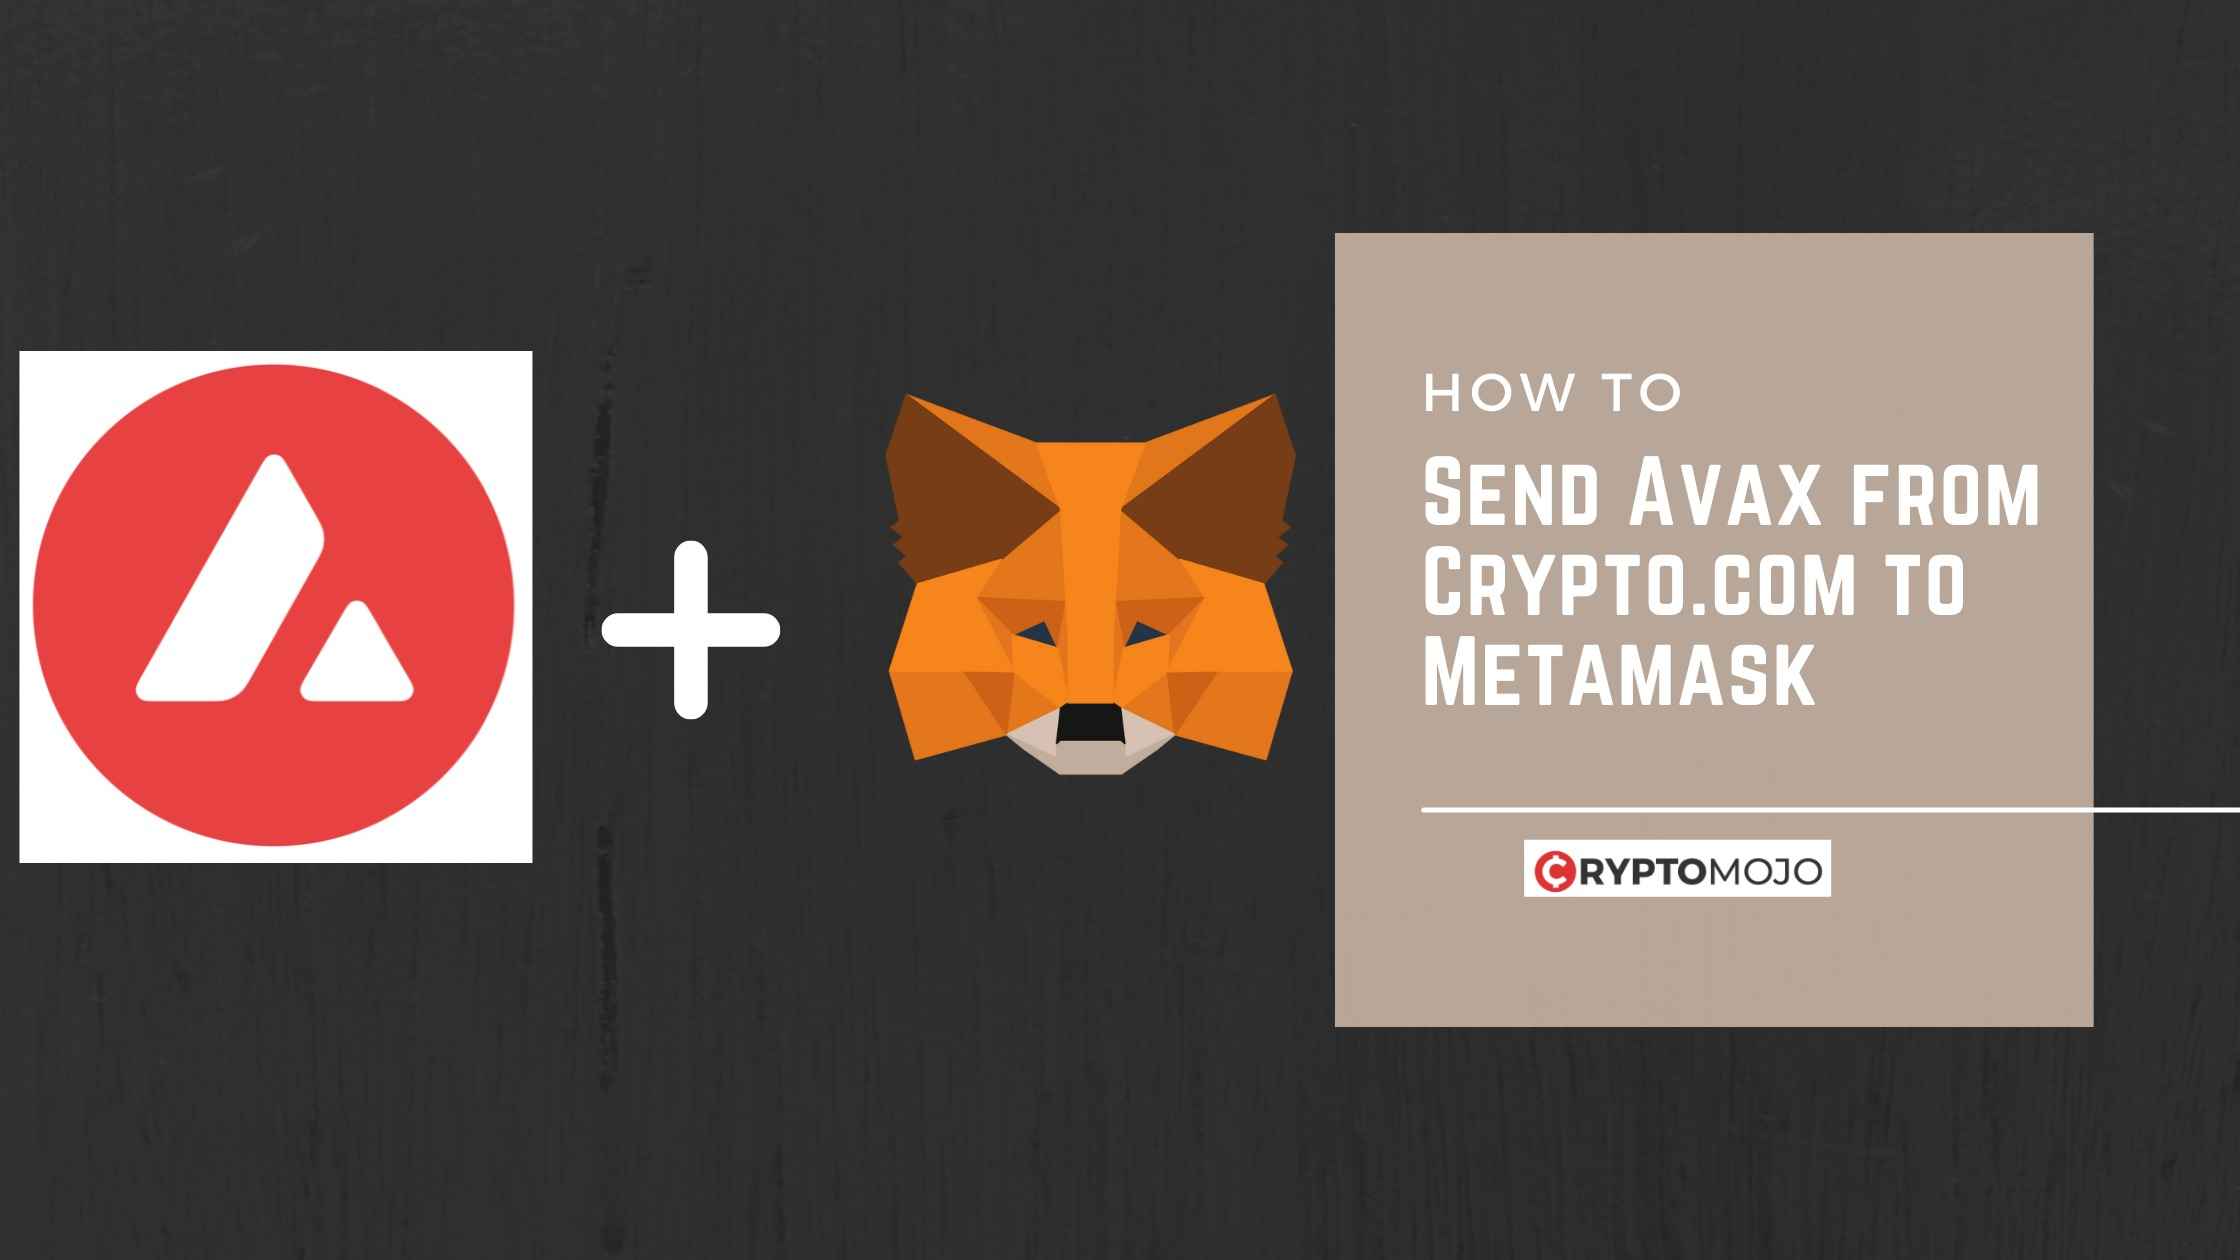 How to Send AVAX from Crypto.com to MetaMask